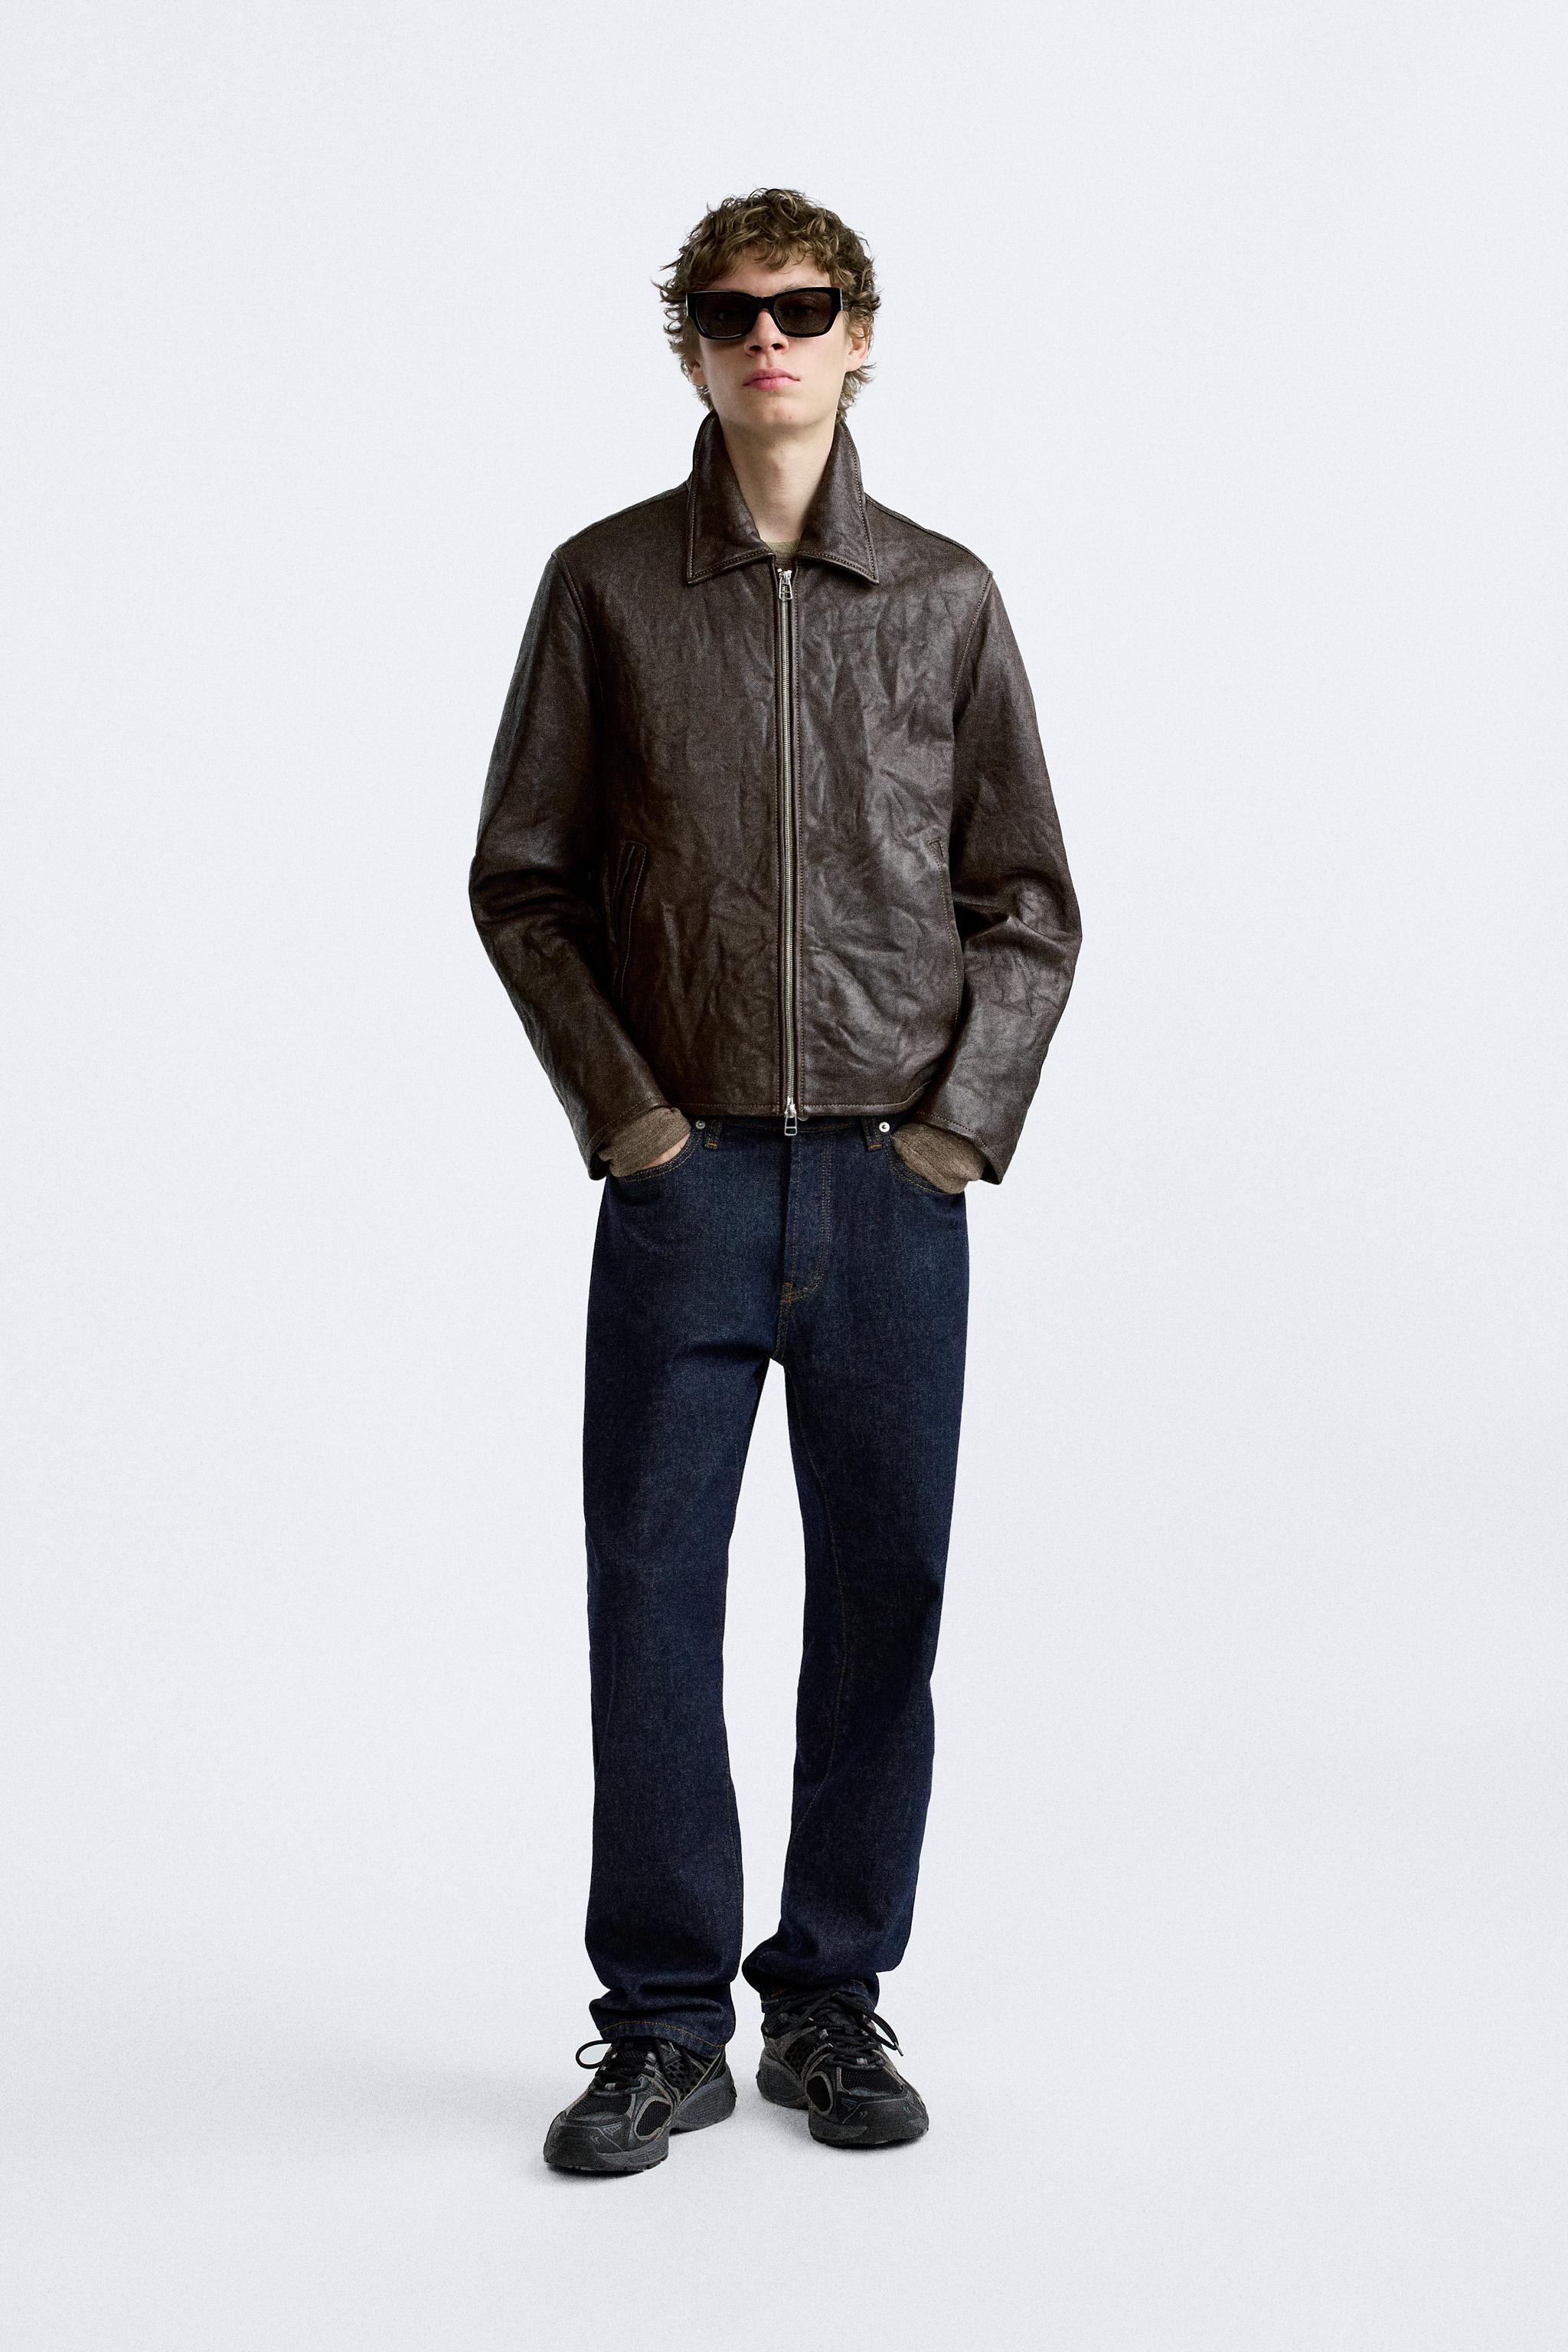 Men's Leather Jackets and Coats | Explore our New Arrivals | ZARA 